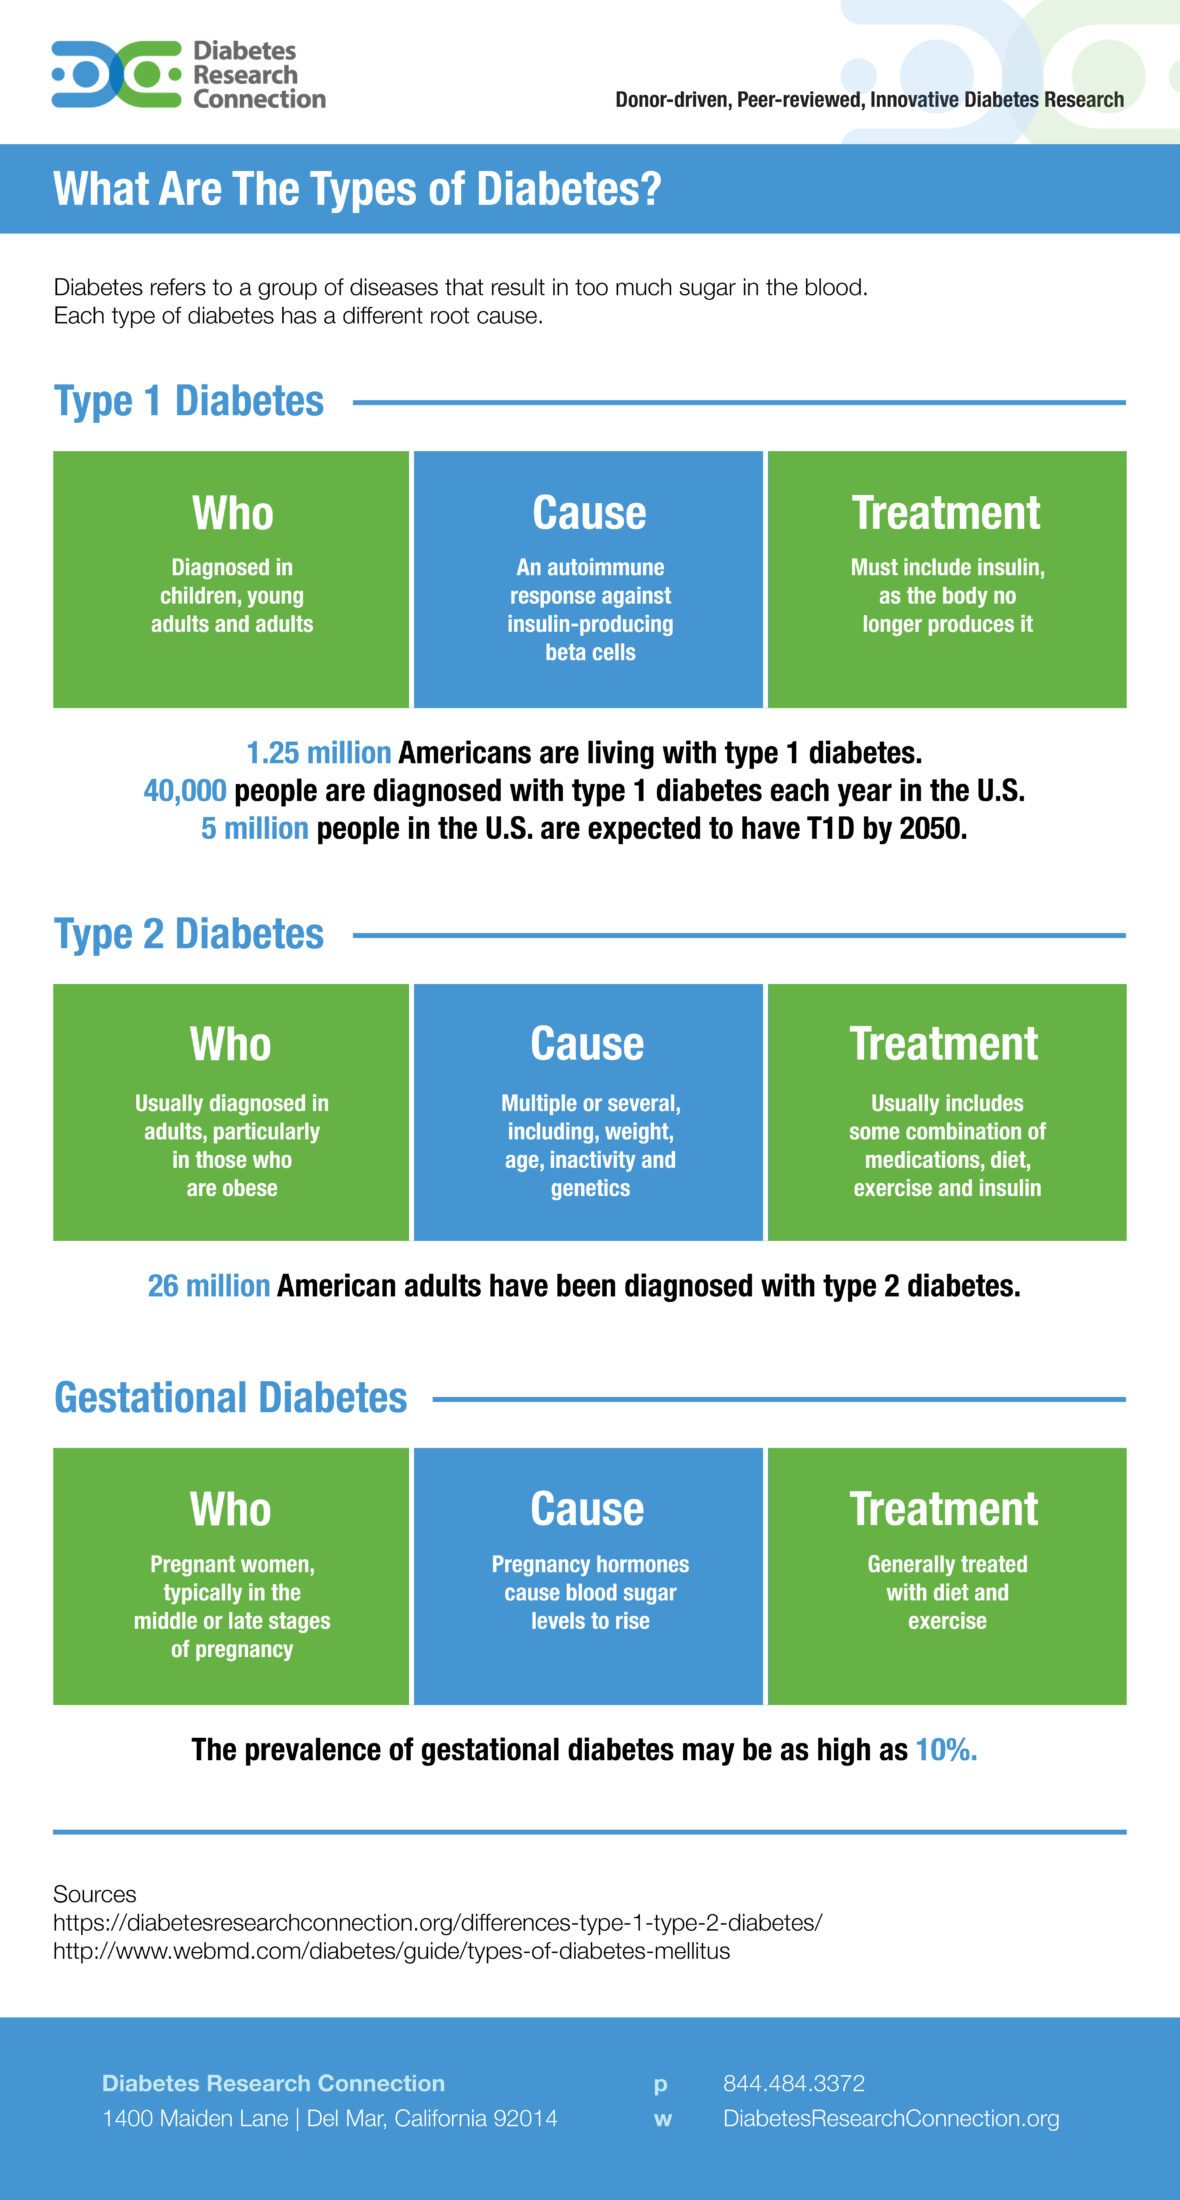 What Are The Types of Diabetes? [INFOGRAPHIC] Diabetes Research